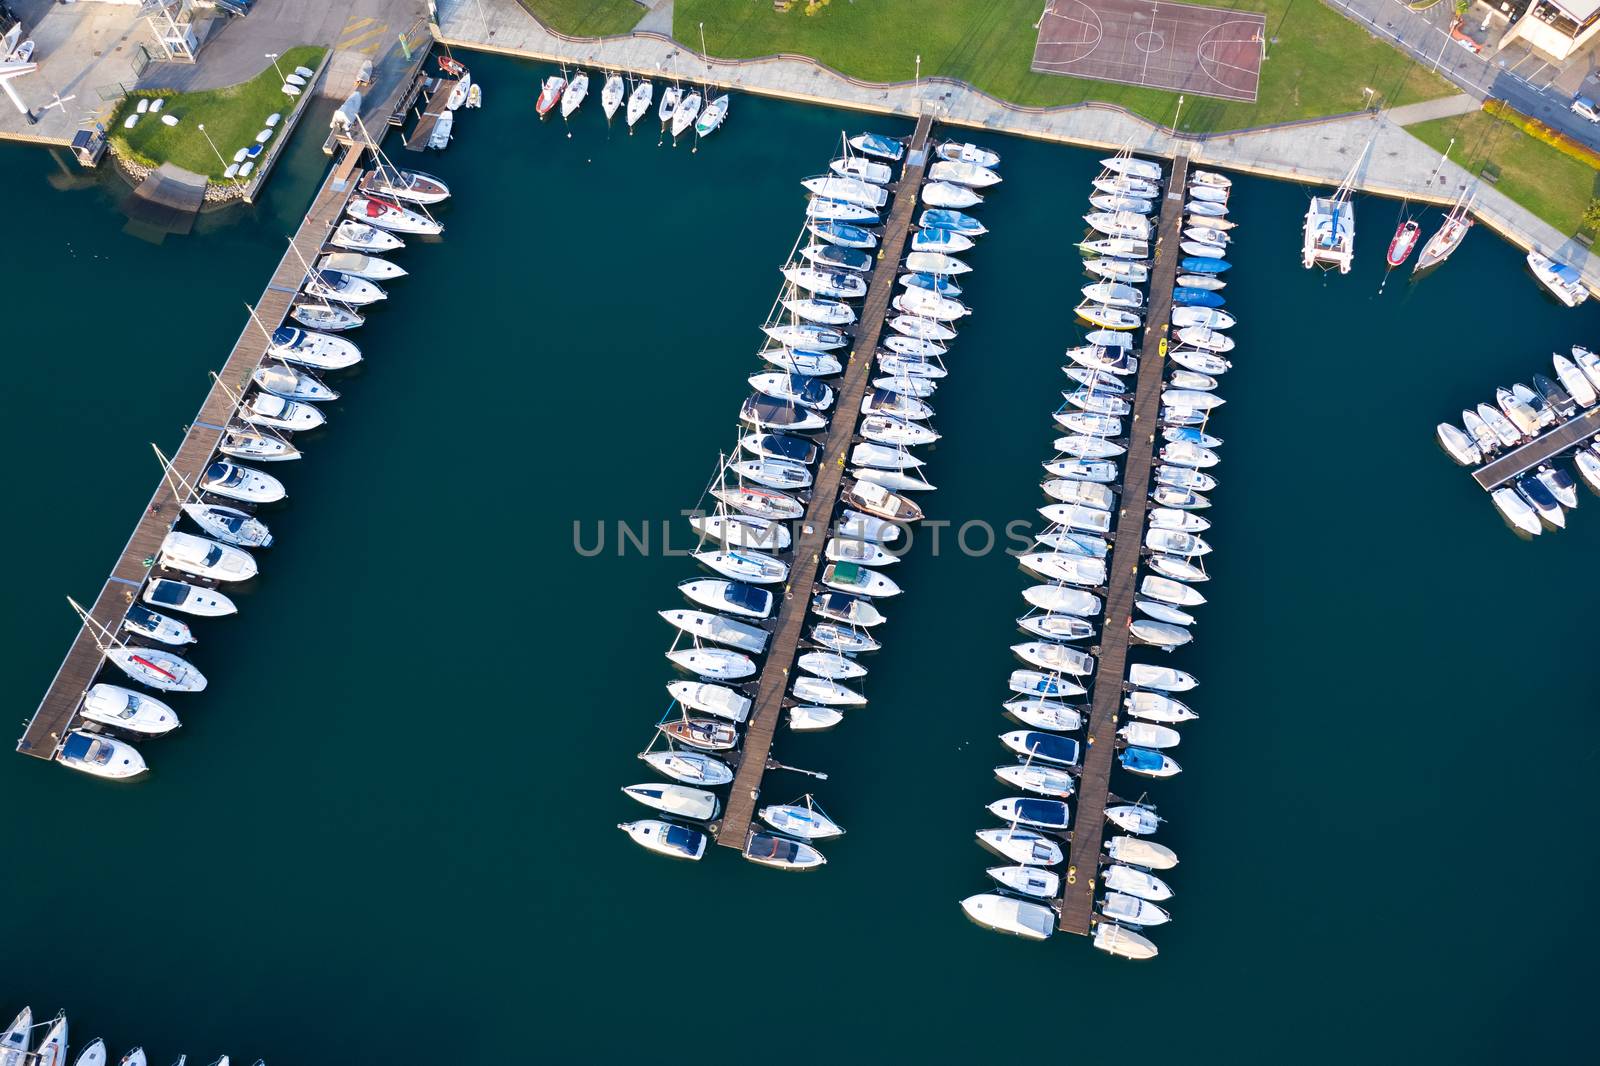 Aerial bird eye view of sailboats and yachts moored in Lovere port, Iseo lake near Bergamo,Italy.